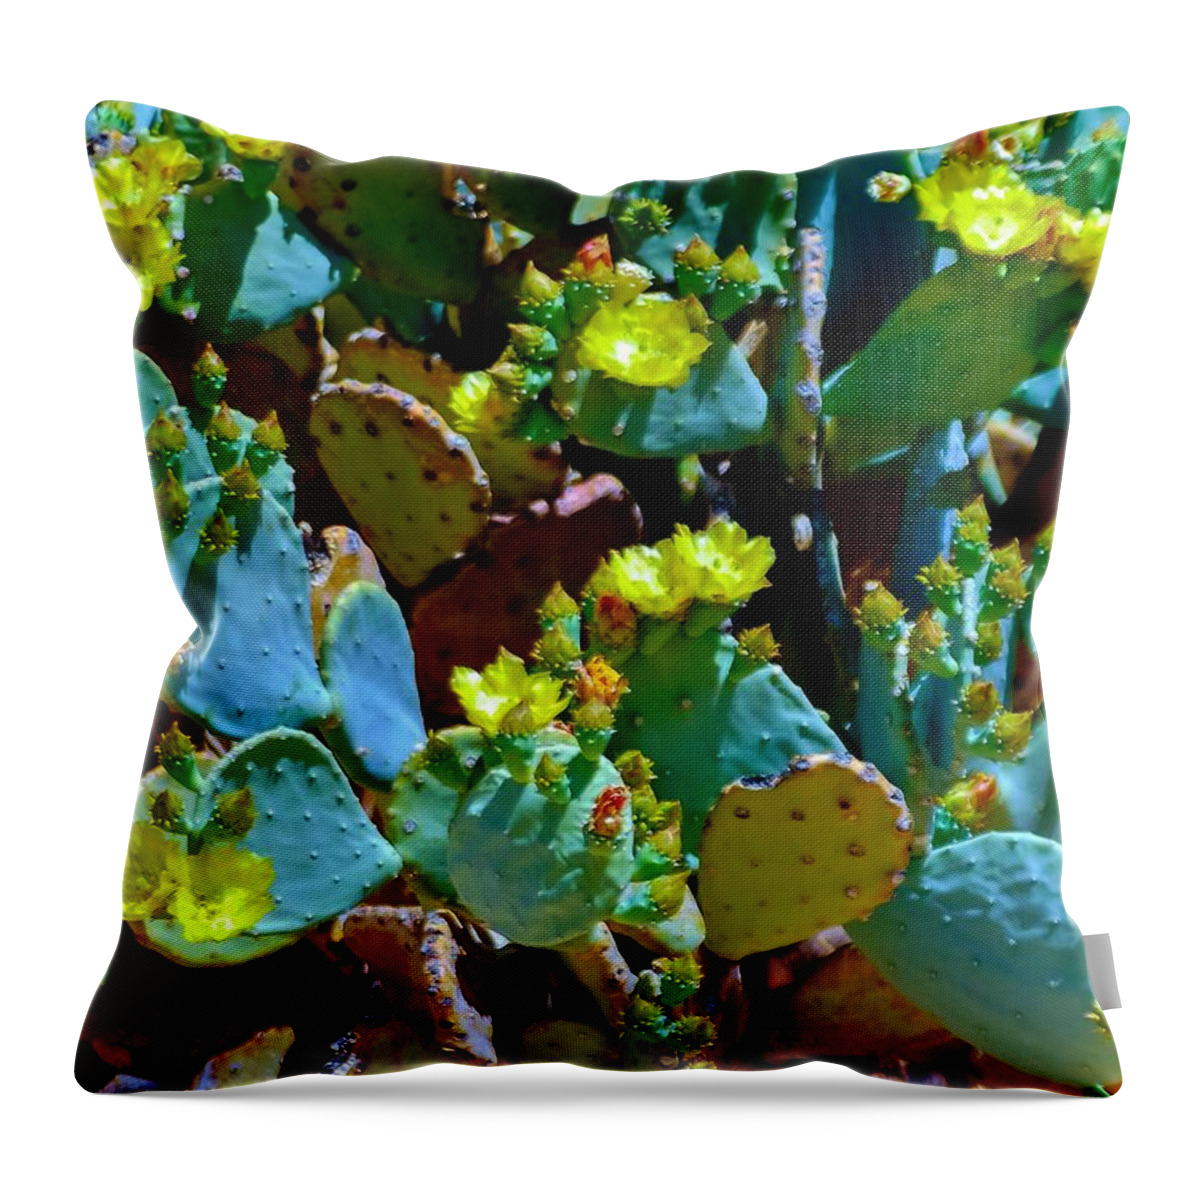 Opuntia Throw Pillow featuring the photograph PricKLy FieLDS by Angela J Wright